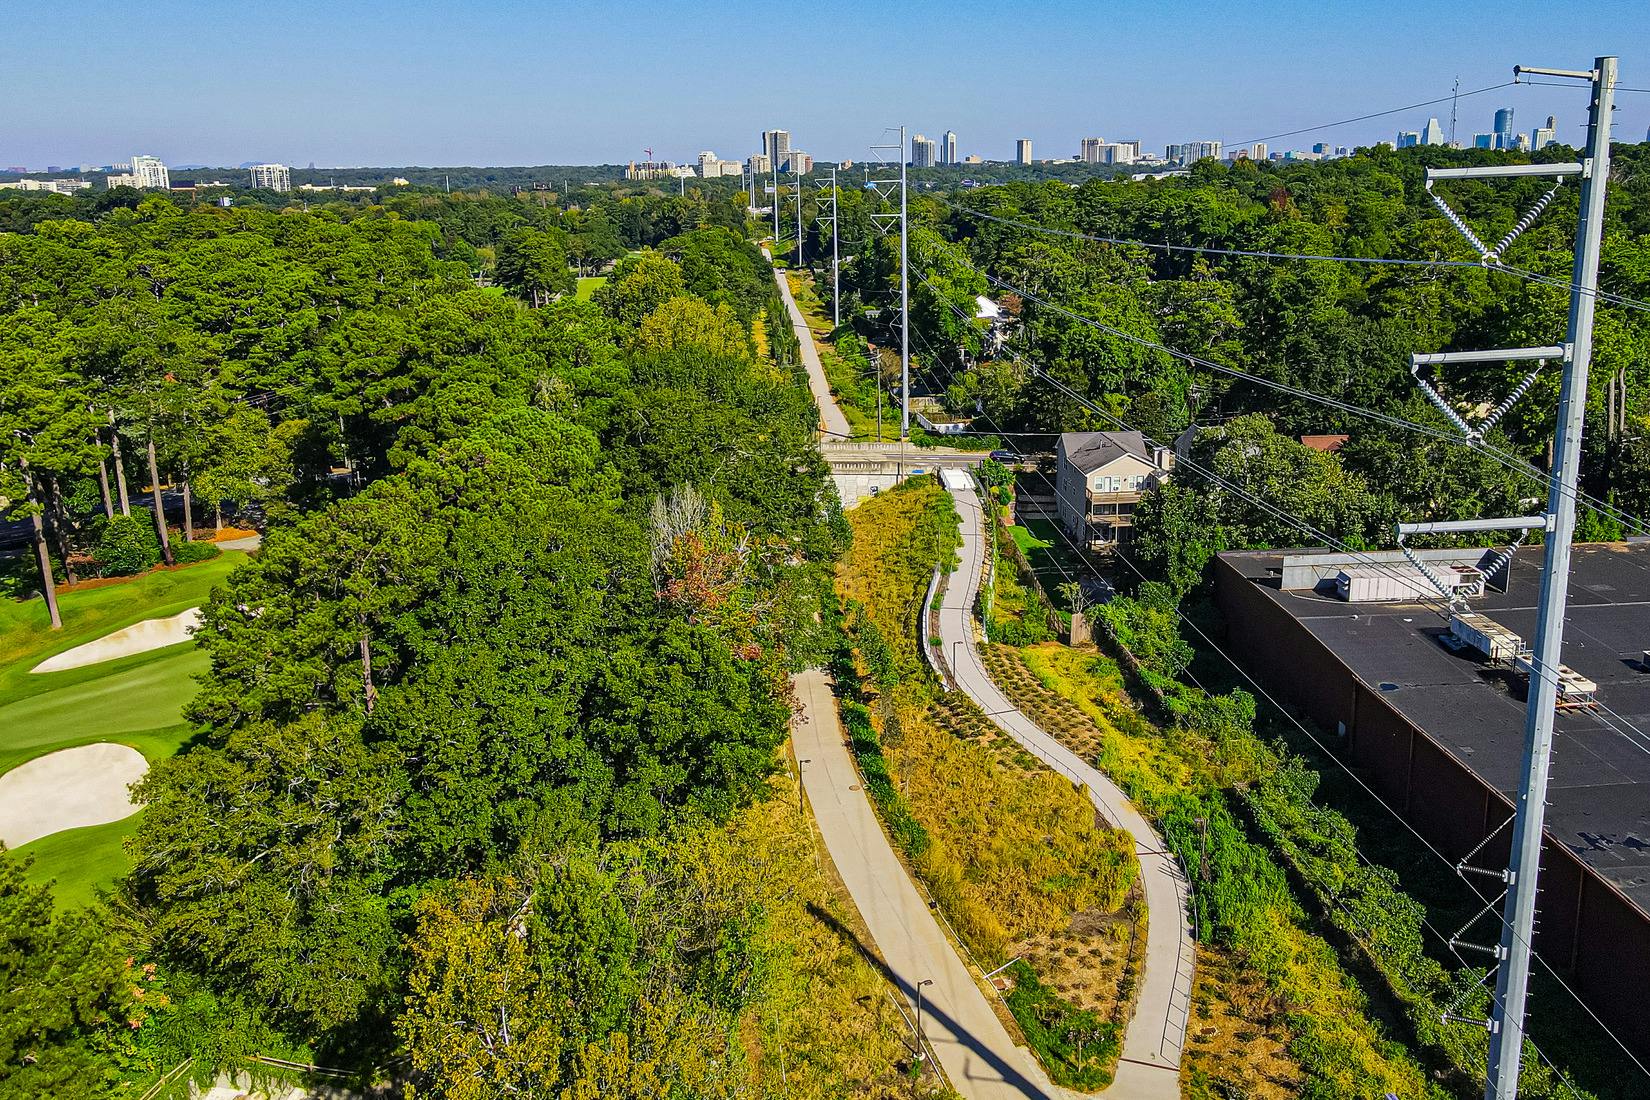 The Beltline's Northeast Trail winds through greenery by Ansley Mall with the Atlanta skyline in the distance. (Photo Credit: LoKnows Drones)